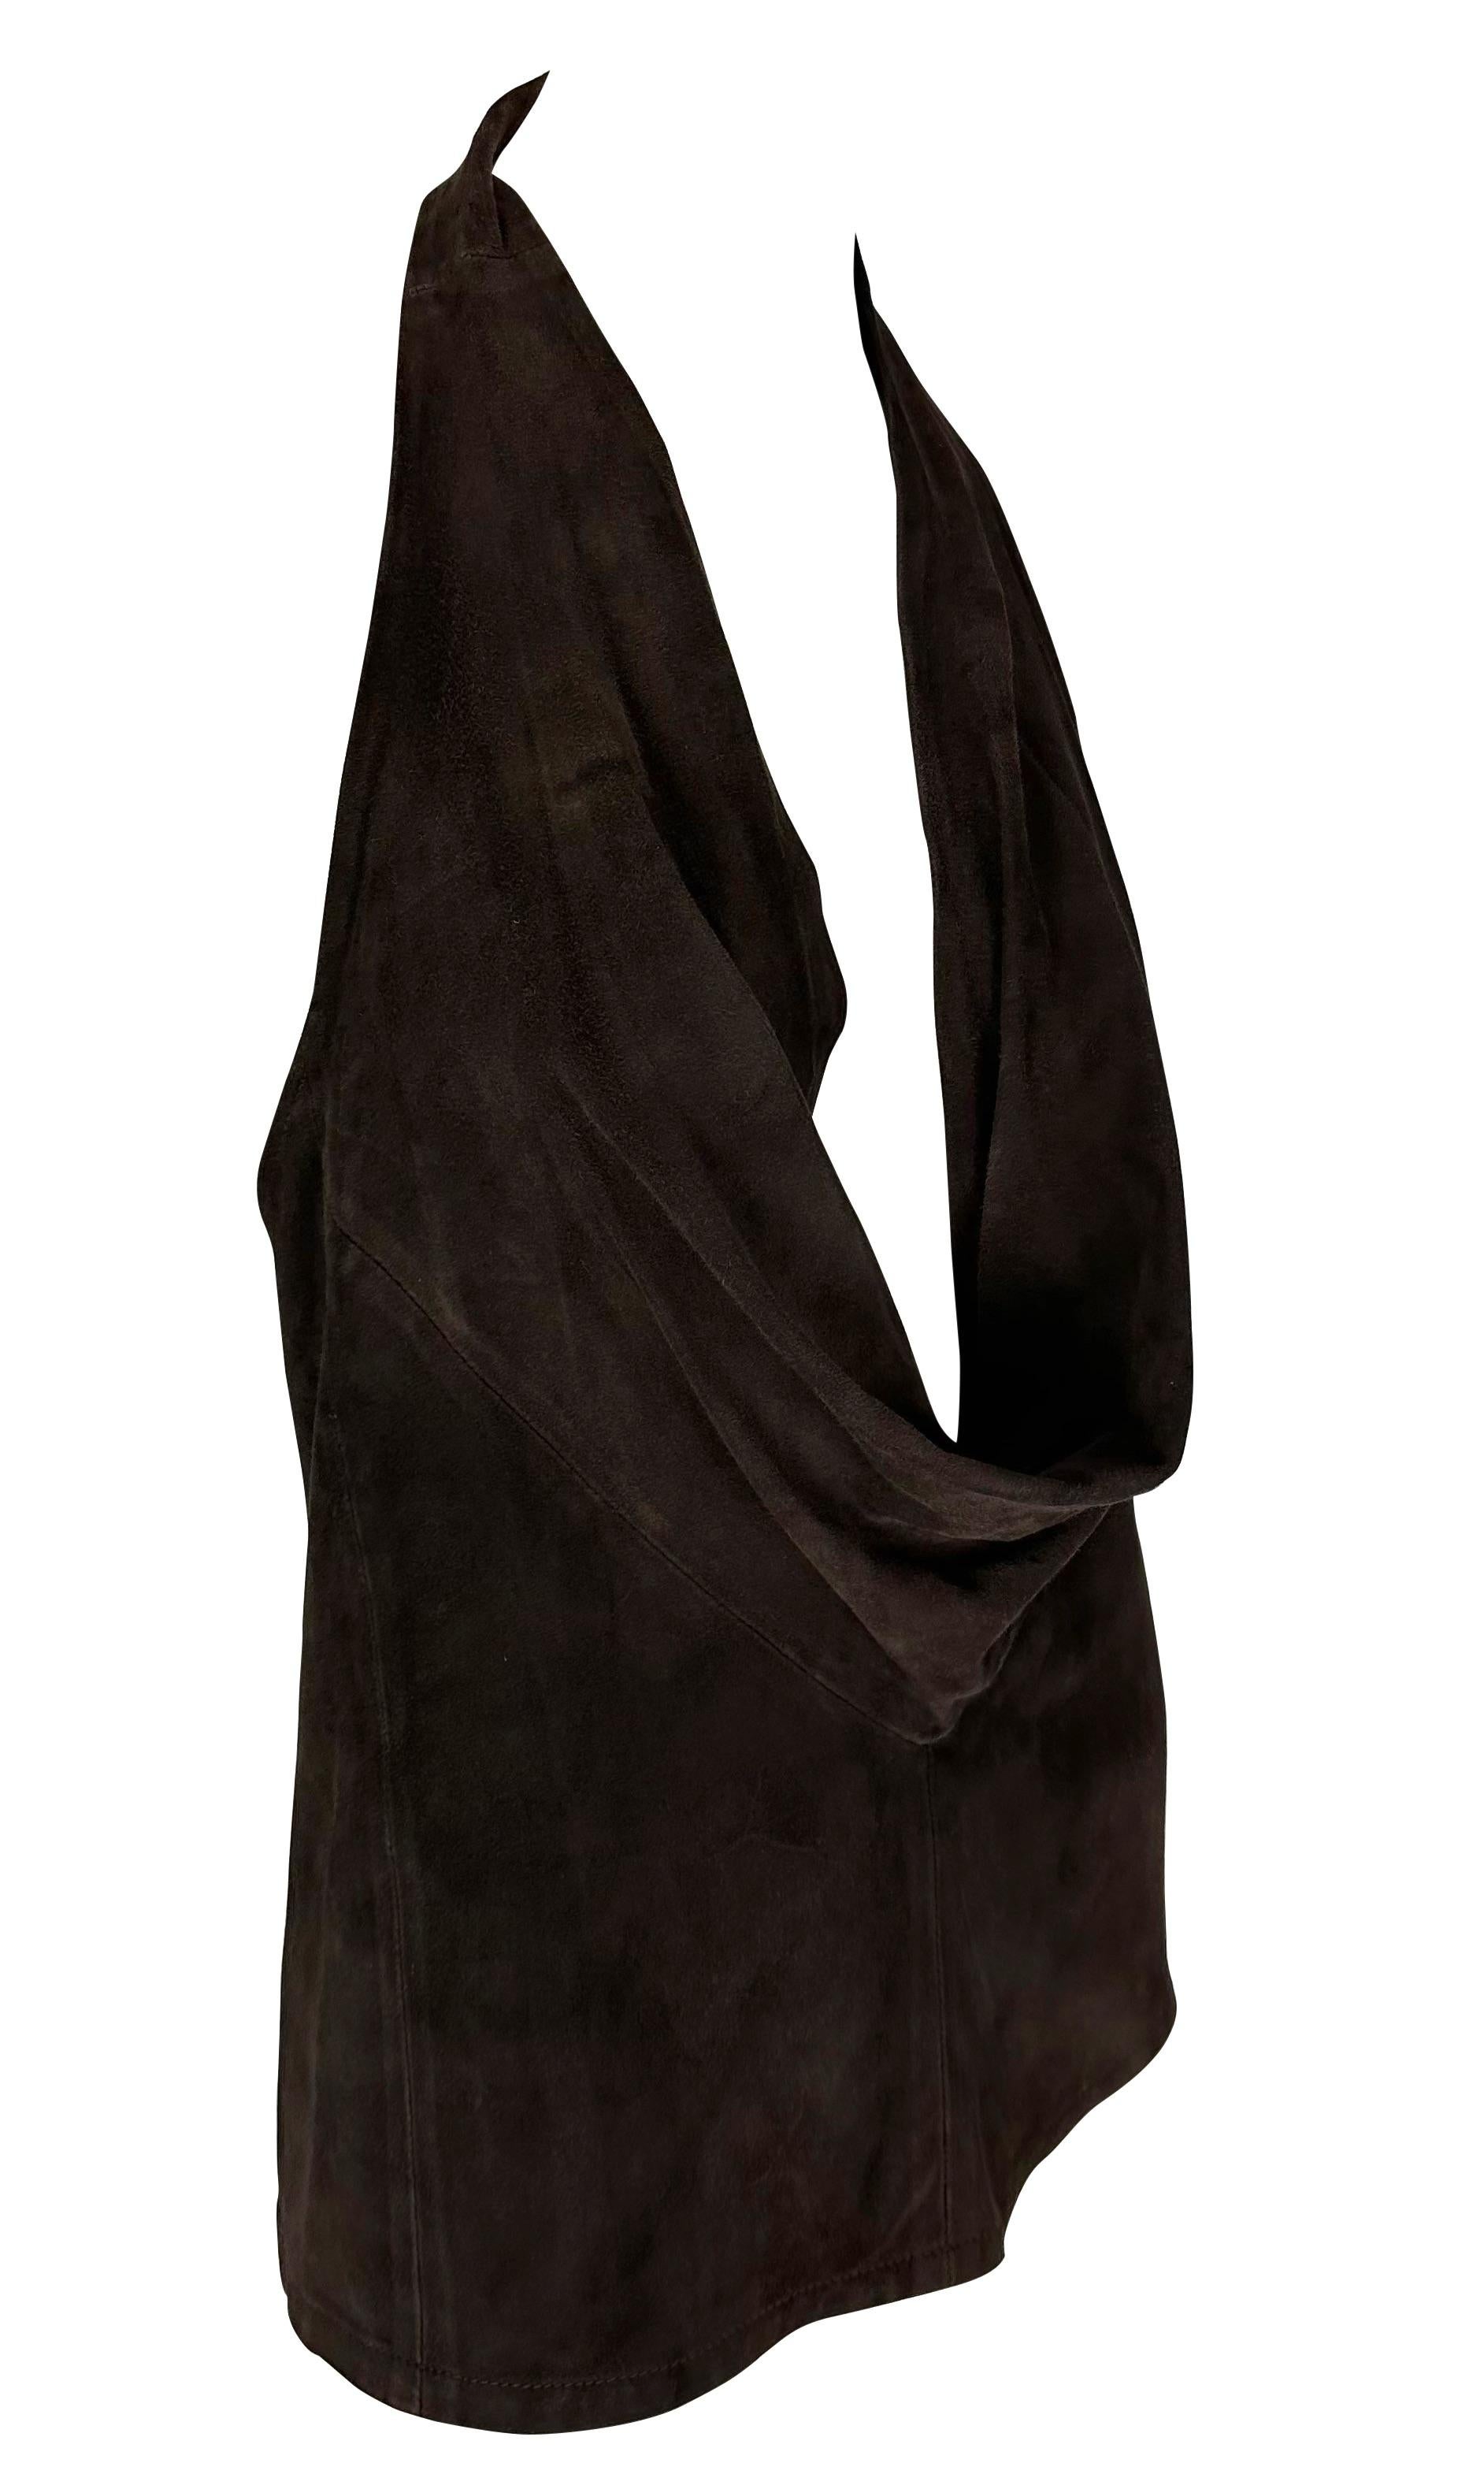 S/S 1997 Gucci by Tom Ford Brown Suede Cowl Neck Halter Top Blouse Backless 1